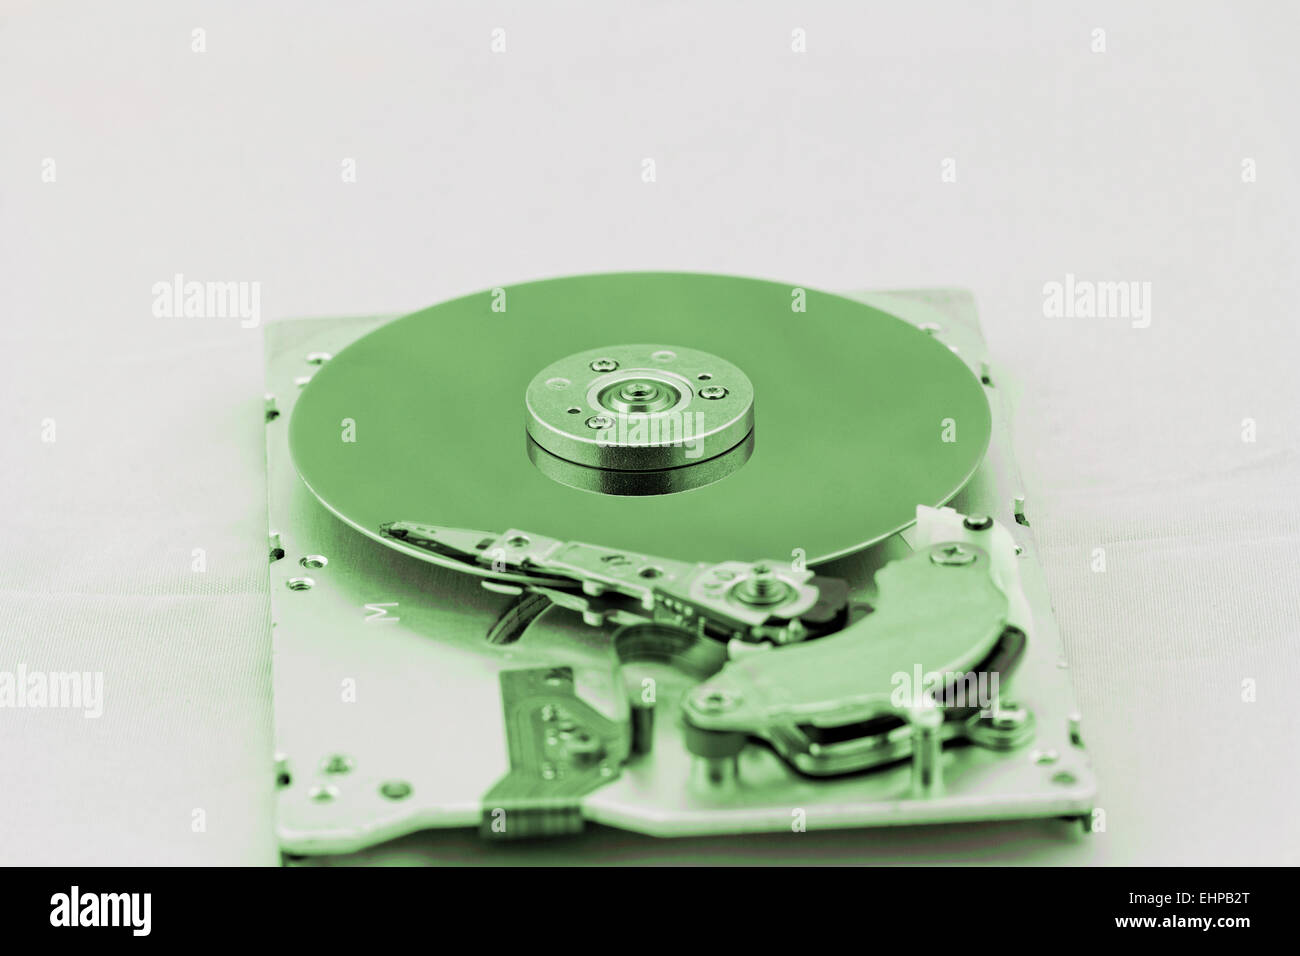 Open computer hard drive on white background Stock Photo